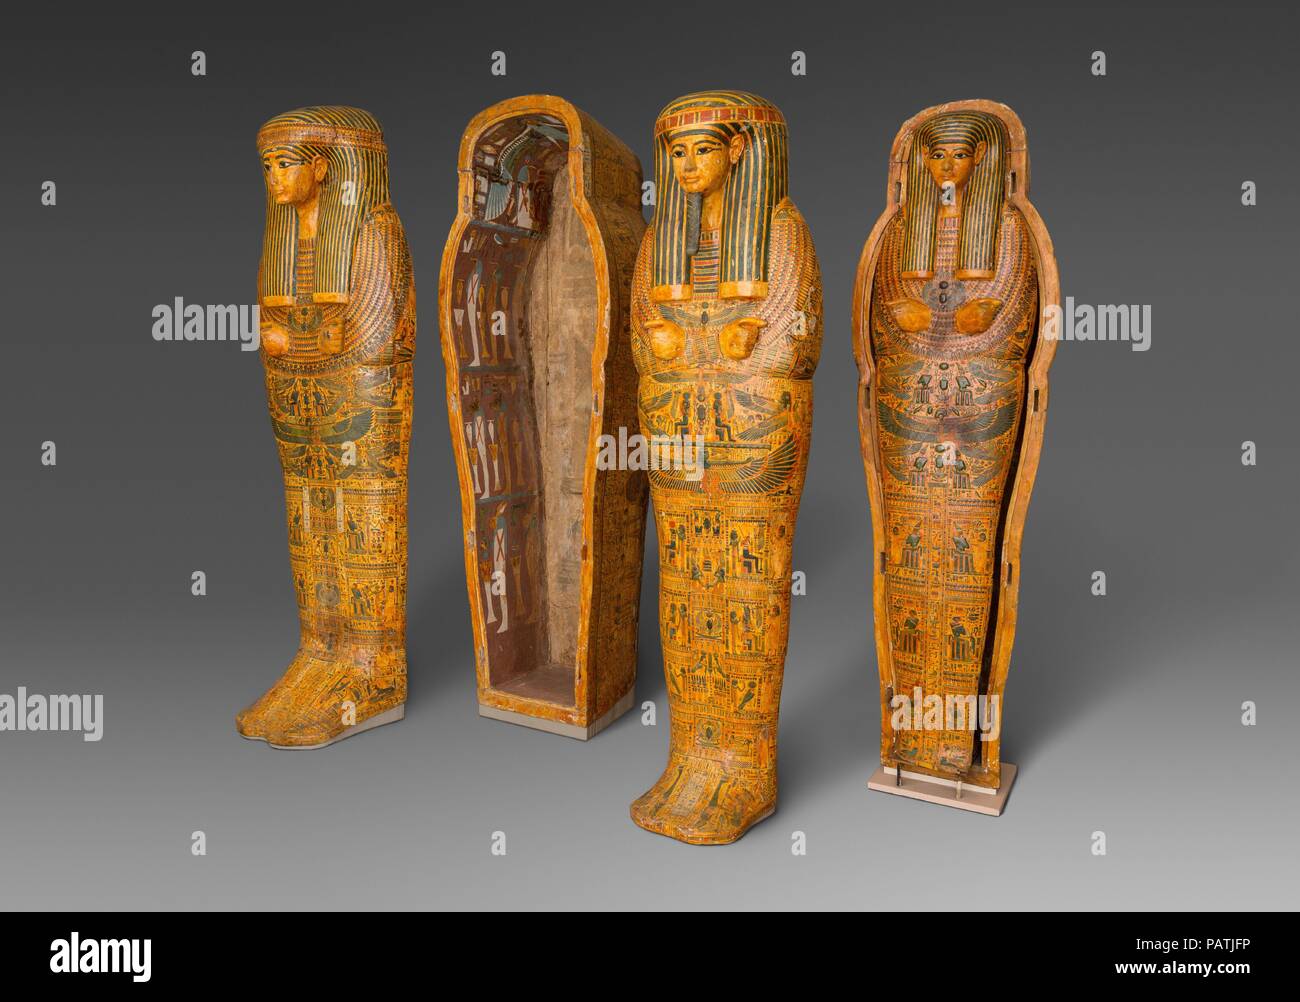 Outer Coffin of Menkheperre (C), usurped from Ahmose. Dimensions: H. 205 cm (80 11/16 in); W. 68 cm (26 3/4 in); D. 90 cm (35 7/16 in). Dynasty: Dynasty 21. Date: ca. 1000-945 B.C..  The nested coffins of the God's Father, Priest of Amun-Re, Menkheperre, son of Fai-Mut (?), were found in the far left corner of the chamber, alongside the burial of the three original occupants of the tomb (see for one of these 25.3.1a, b). Menkheperre's coffins had been usurped from a priest named Ahmose, but they belong stylistically to the type of coffins produced in Thebes at that time, and were therefore sti Stock Photo